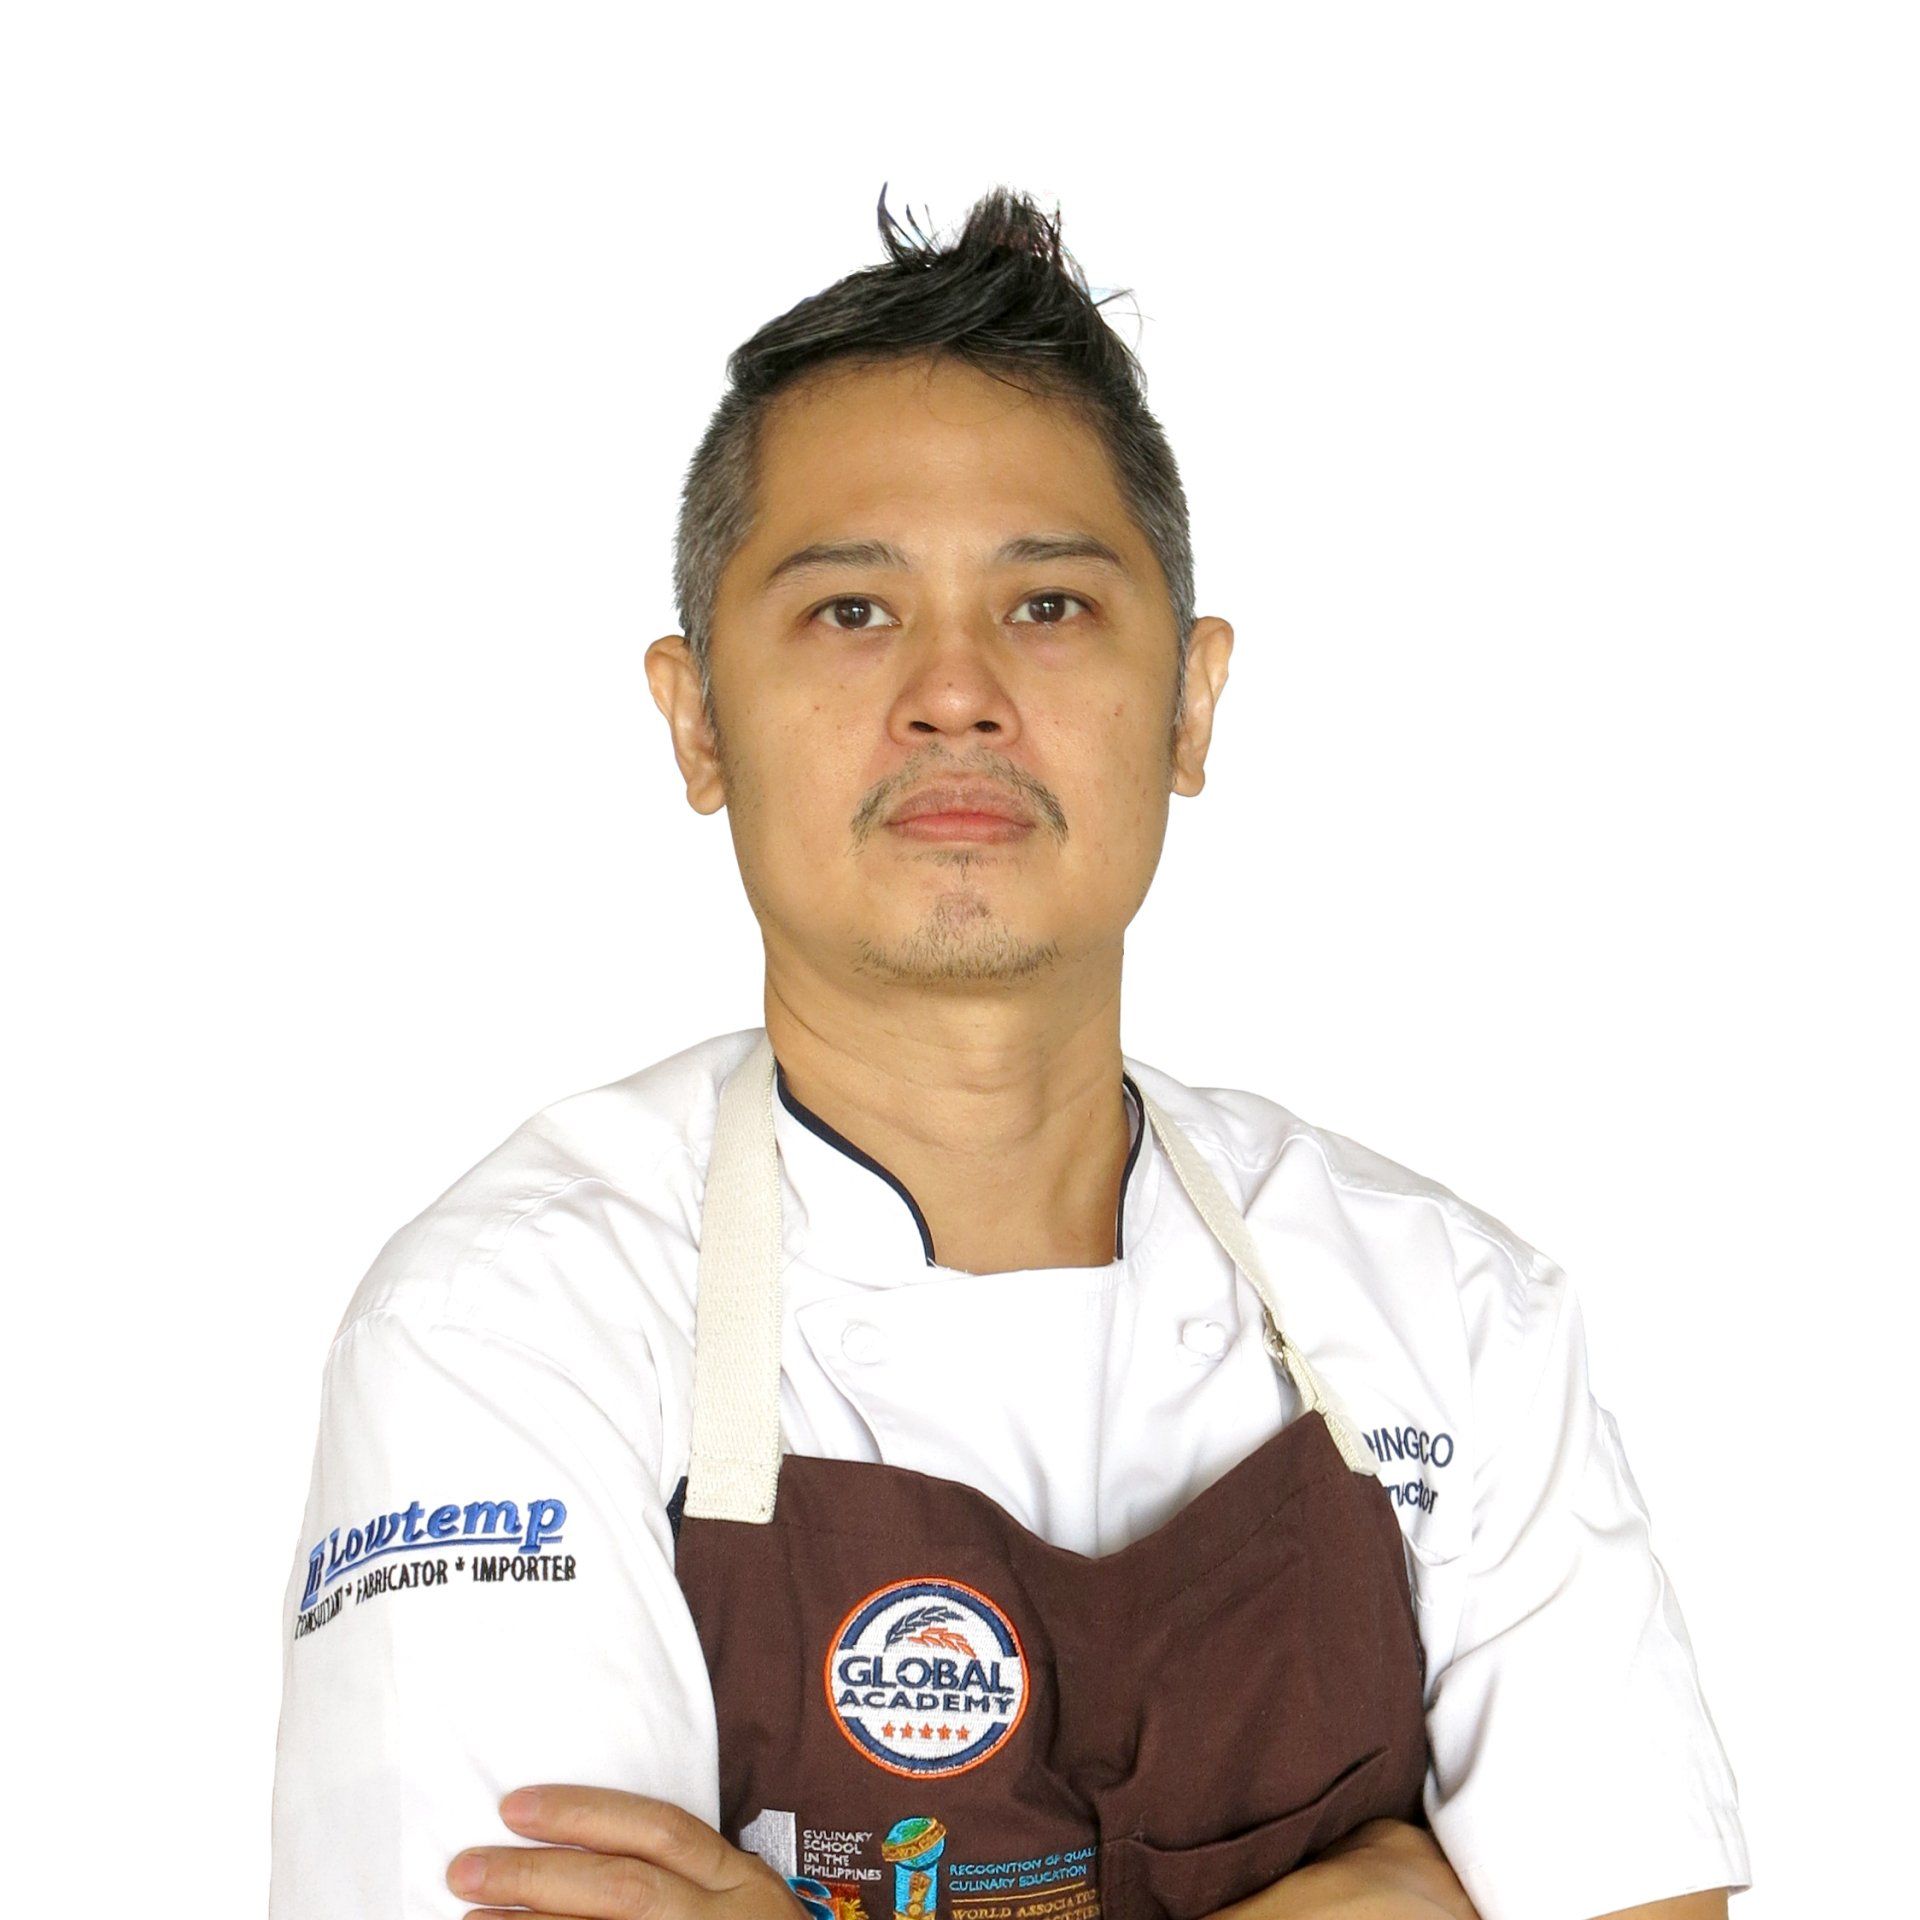 Chef Enrique Manuel H. Yoingco, one of the 'Global Academy' instructor